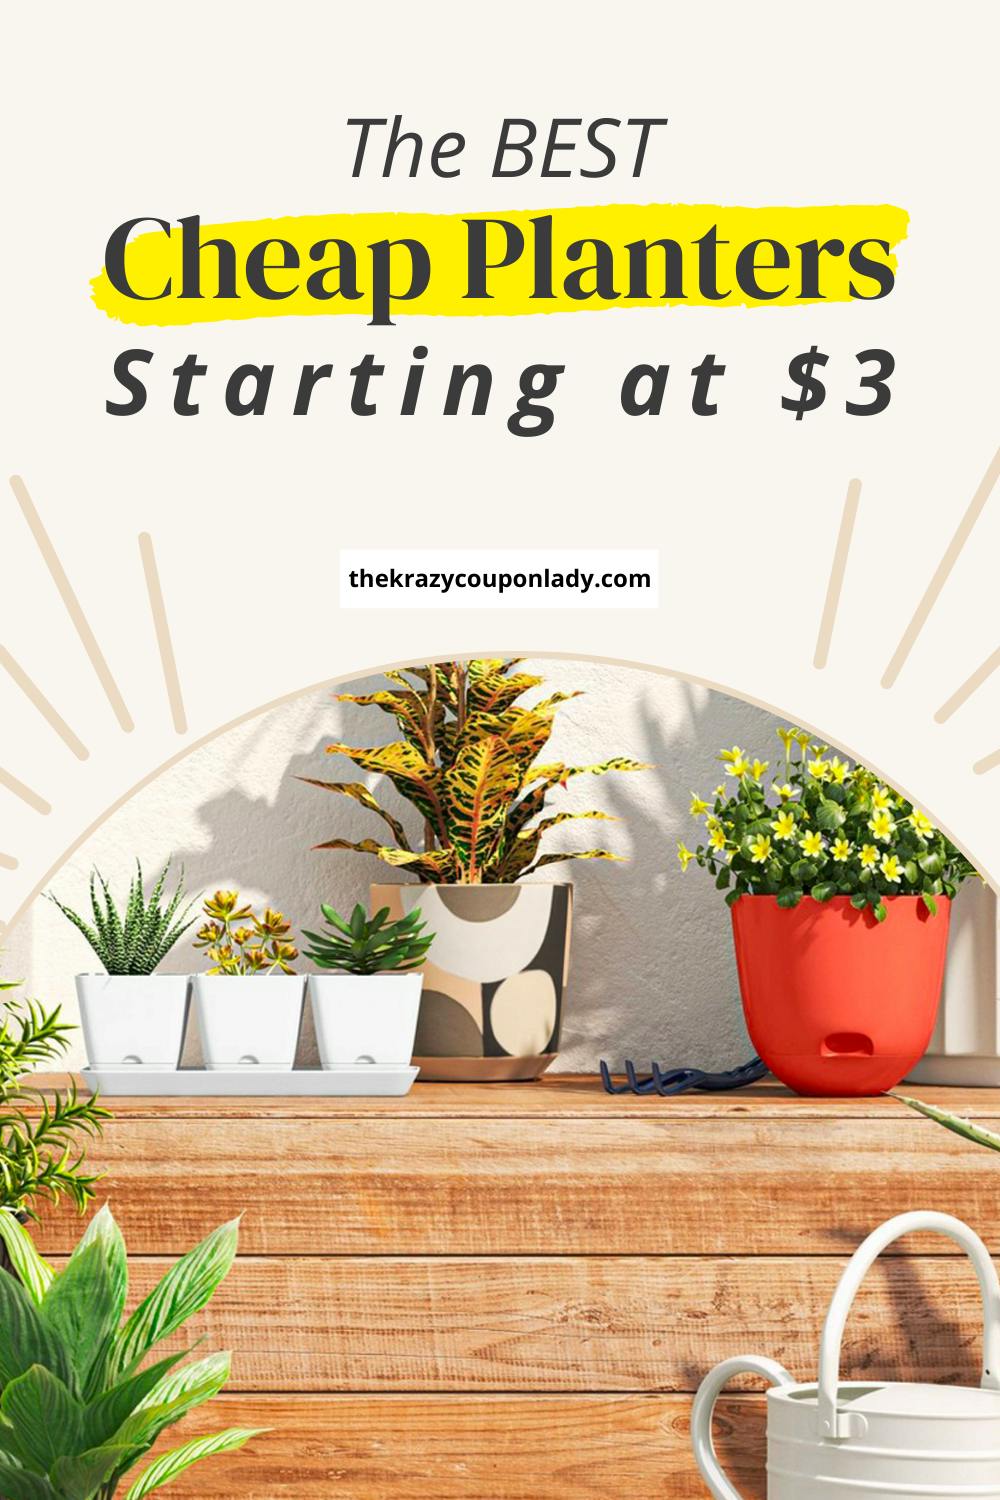 Our Favorite Cheap Planters Start at Just $3